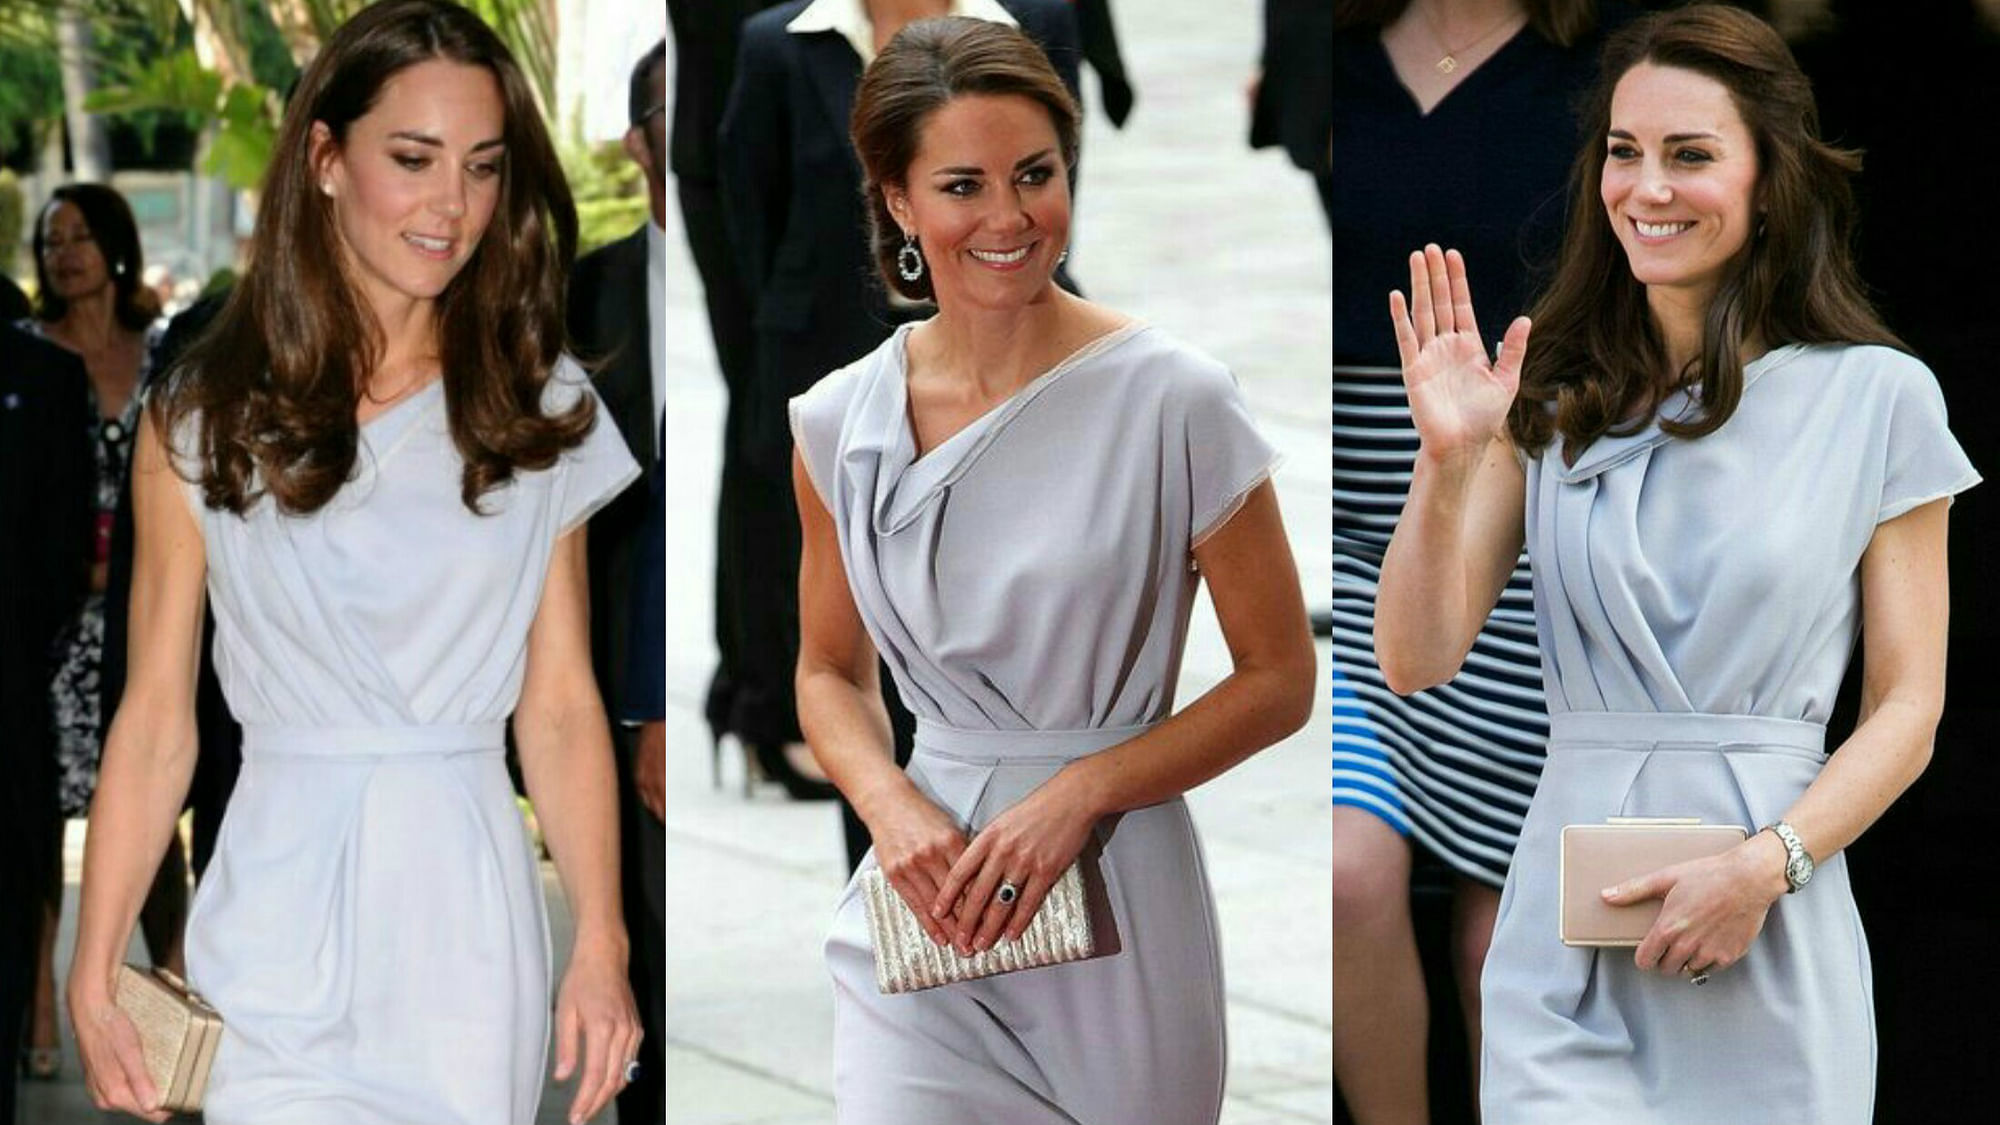 Kate Middleton is one of the biggest style icons of our time. Have you noticed something about her style?&nbsp;